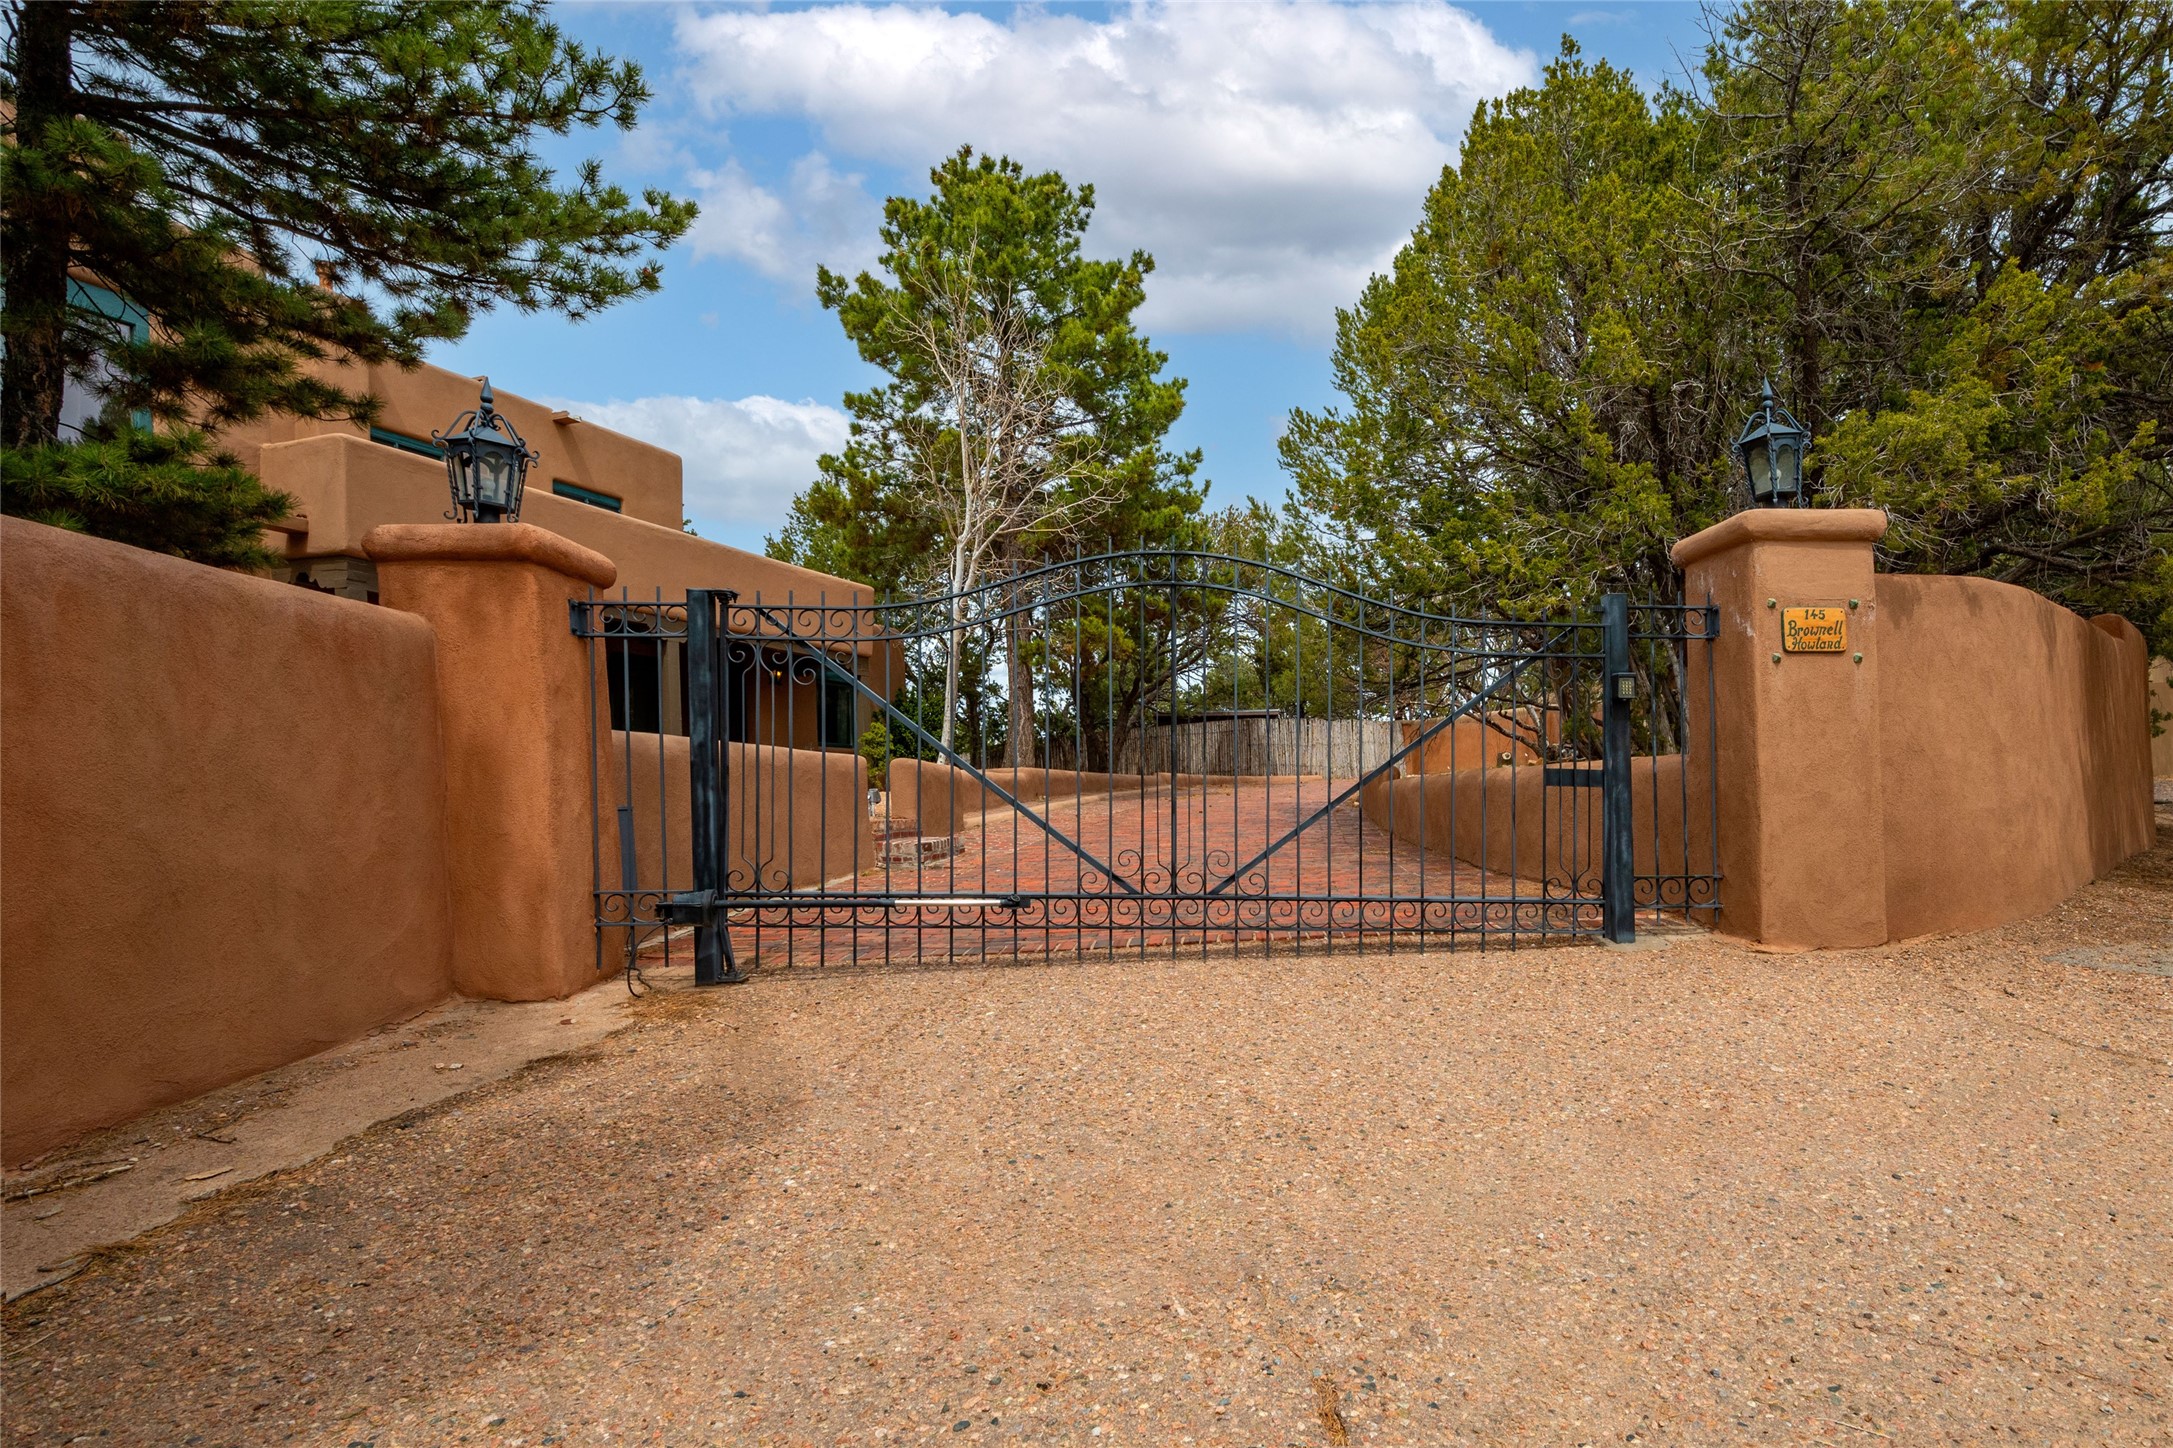 145 Brownell Howland, Santa Fe, New Mexico 87501, 4 Bedrooms Bedrooms, ,4 BathroomsBathrooms,Residential,For Sale,145 Brownell Howland,202401318